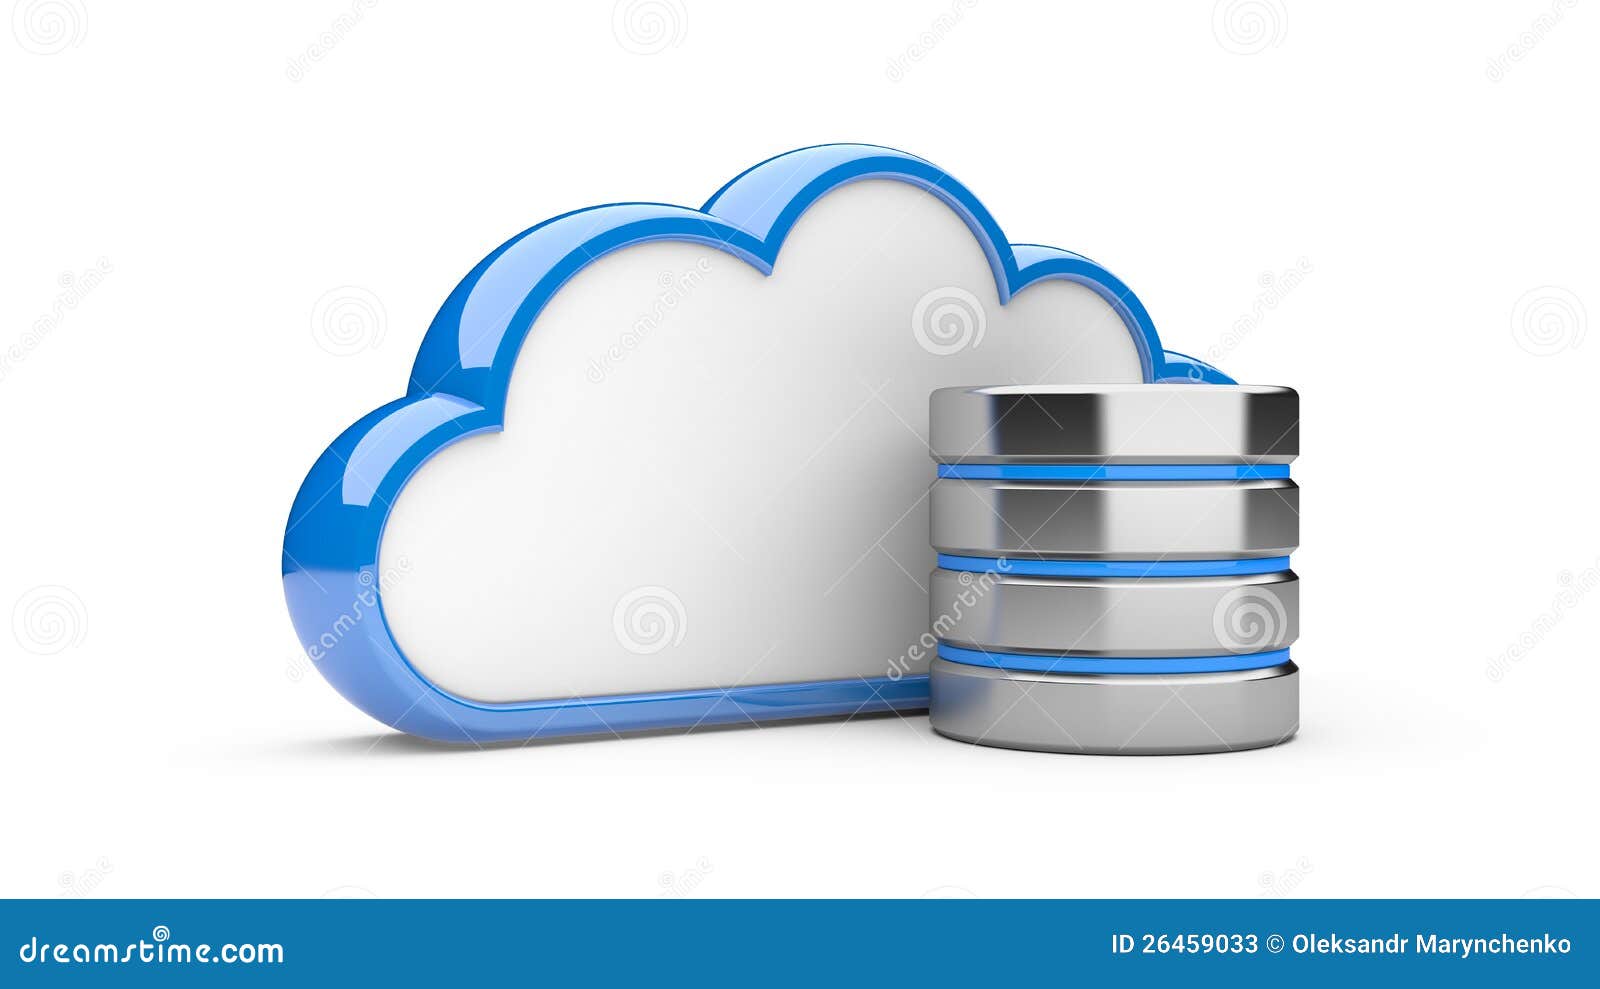 cloud with hdd, database concept